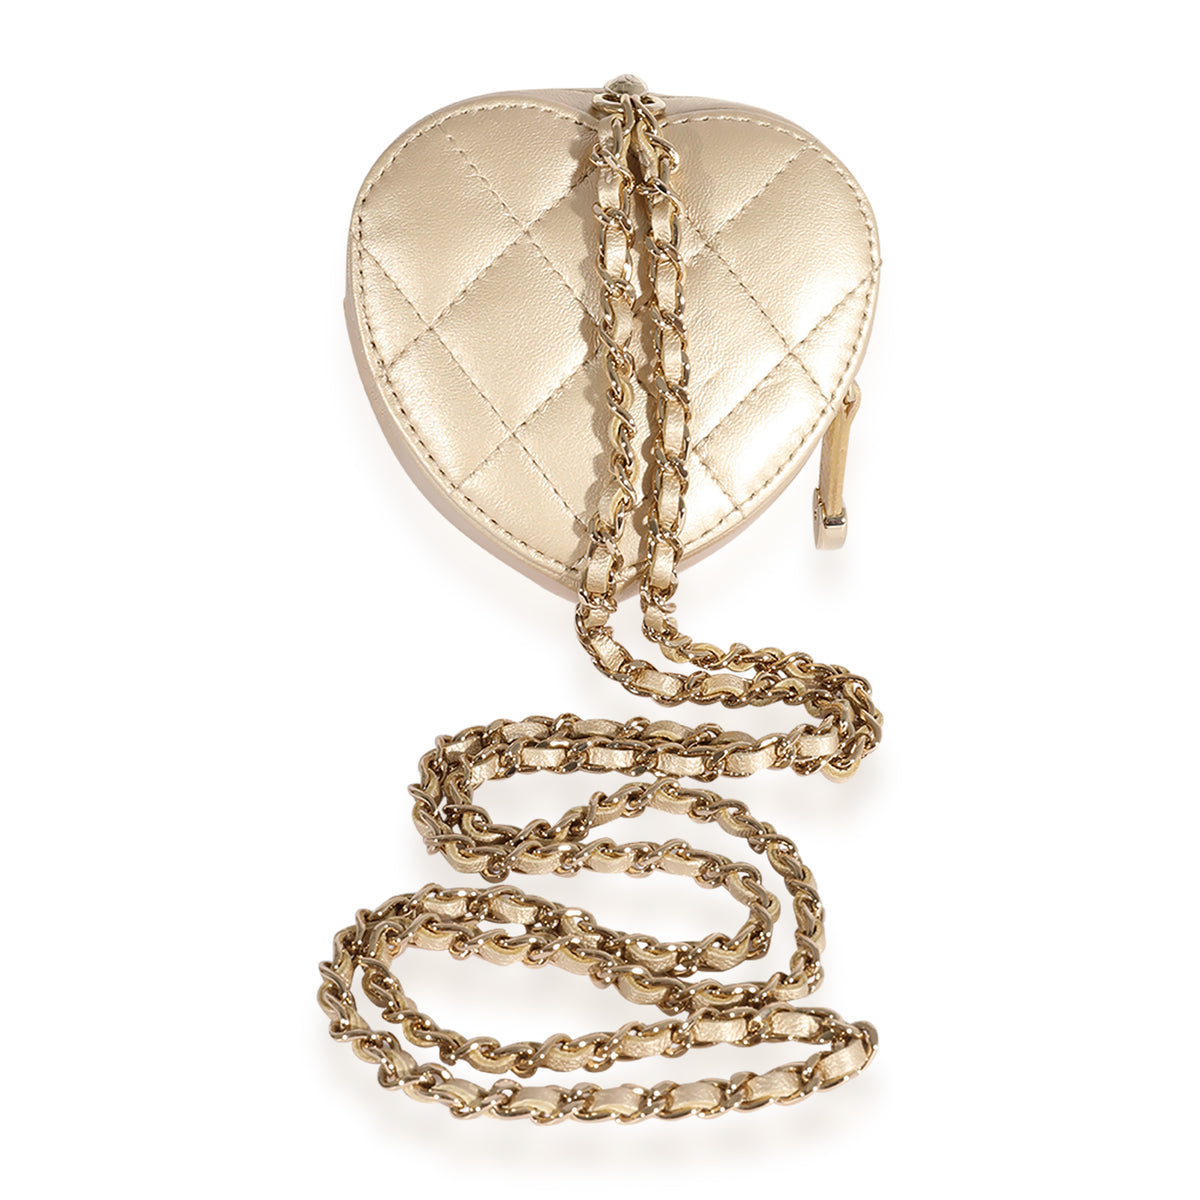 Metallic Gold Quilted Lambskin Heart Coin Purse Necklace